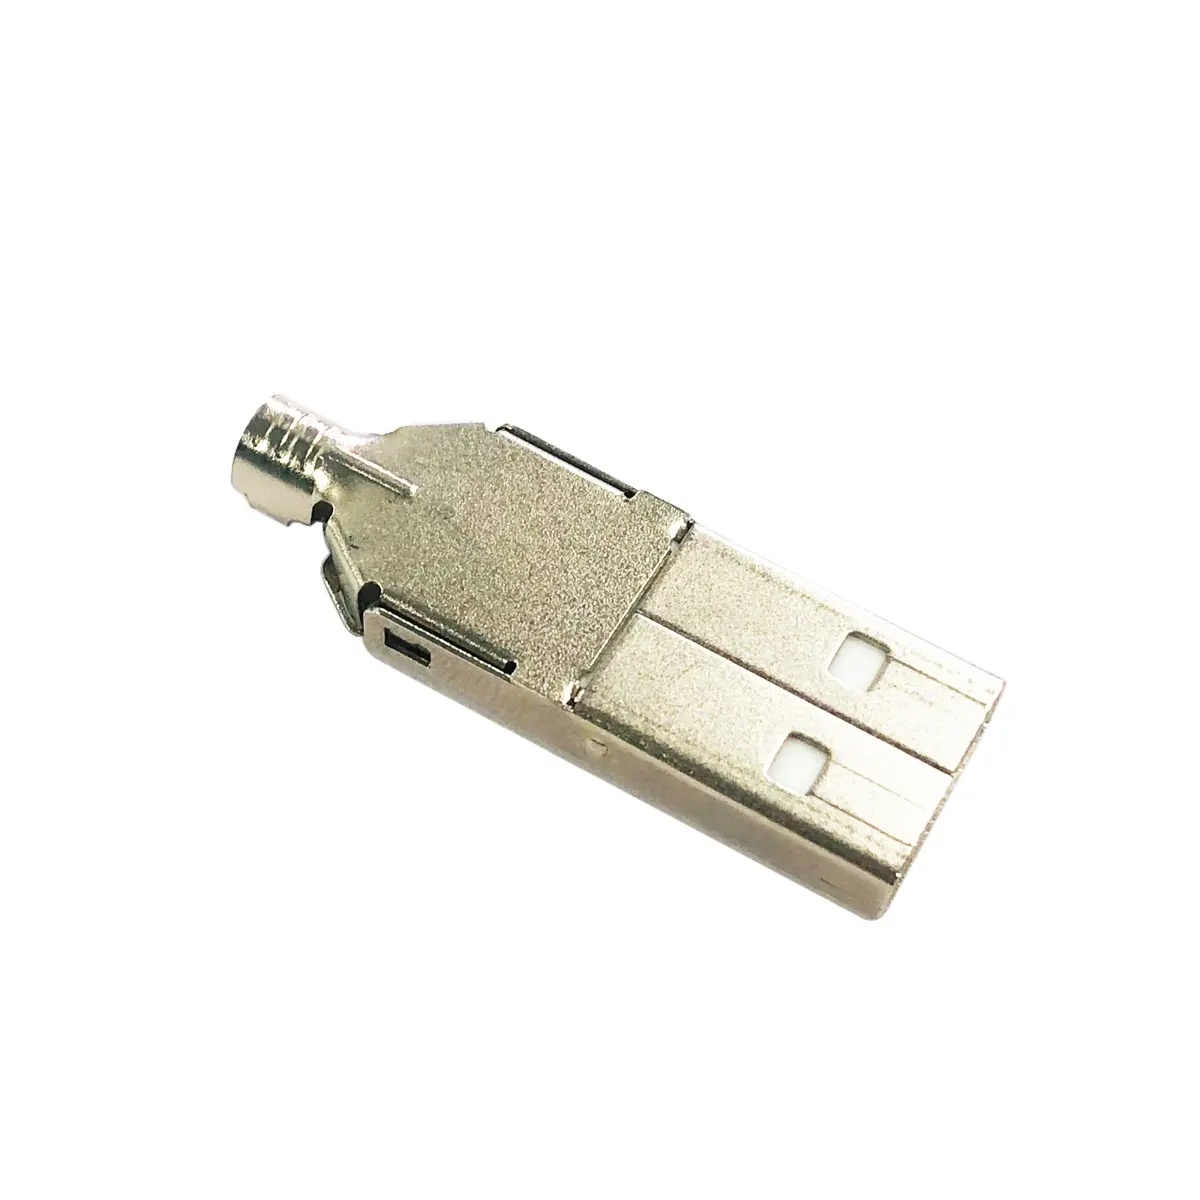 Vernikkelde Usb2.0 Connector Diy Adapter Mannelijk Soldeer Type Usb A Type Connector Pcb Usb-A Tail Socket 3 In 1 Pc Aa Dip 5a Fpic